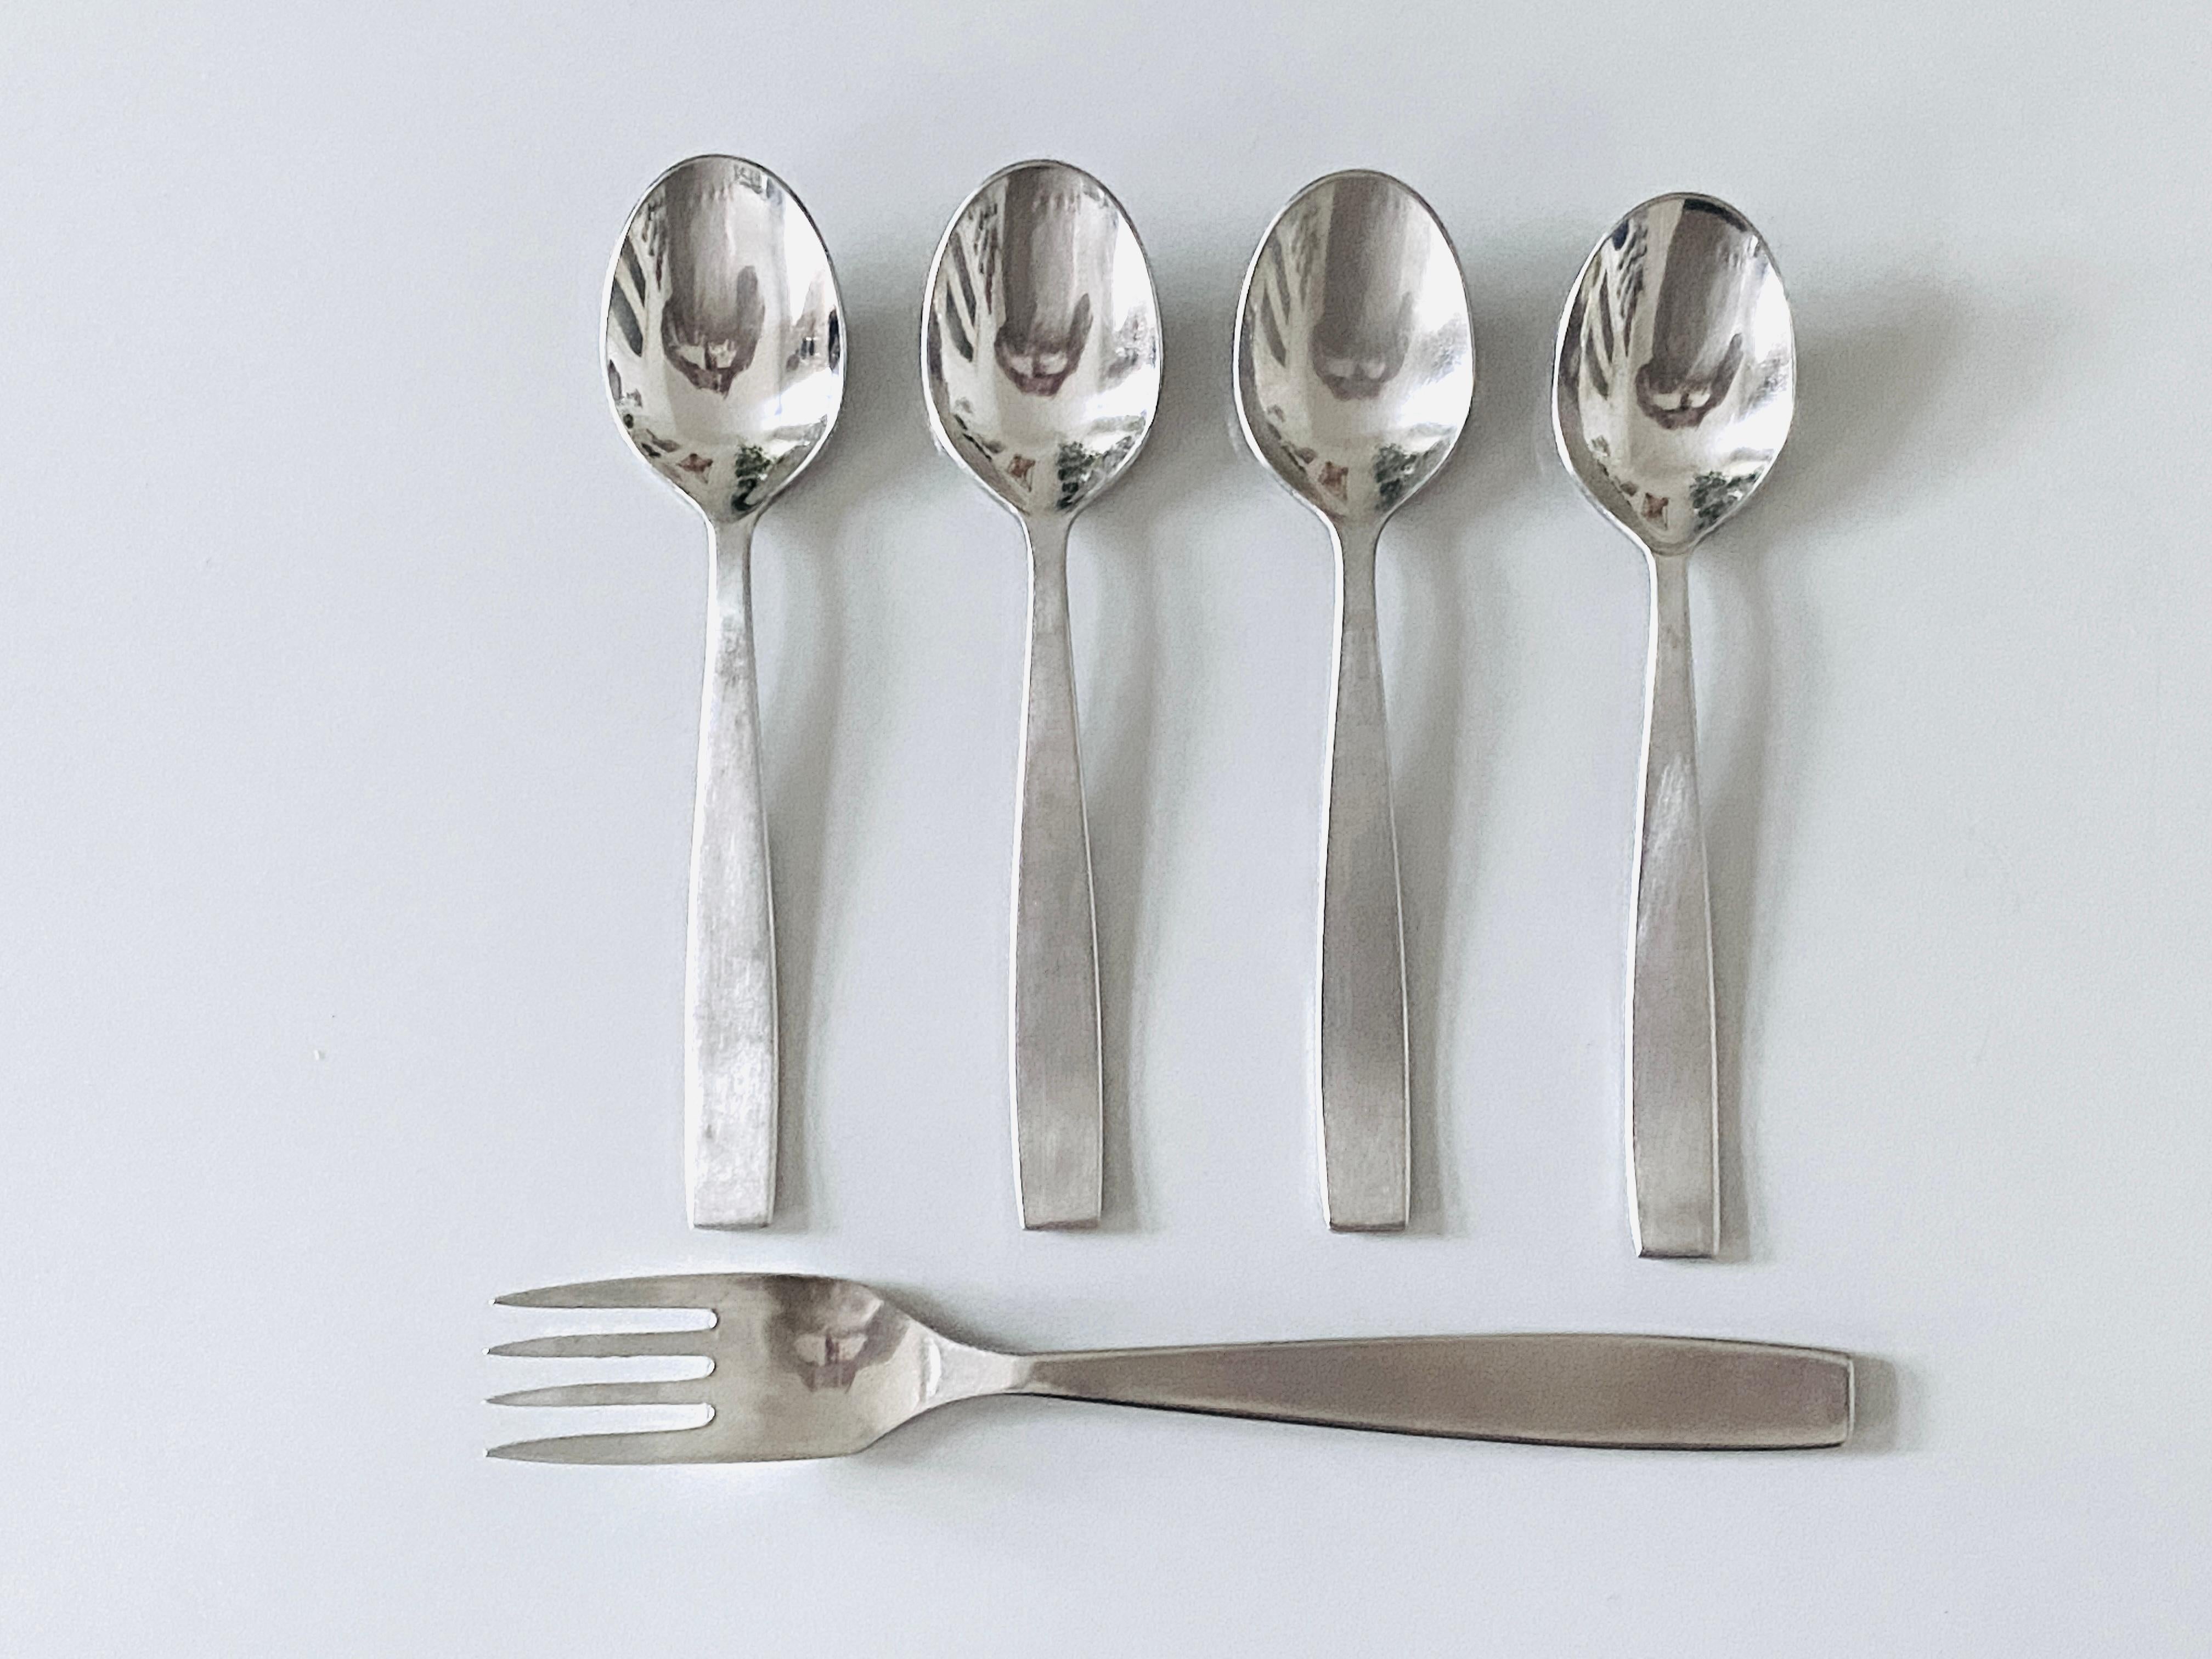 A fork and 4 spoons from Austria, model 2050, designed by Helmut Alder, executed by Amboss Austria in the 1950s. High-quality flatware, made of brushed and polished stainless steel. In good condition with marginal signs of wear. 